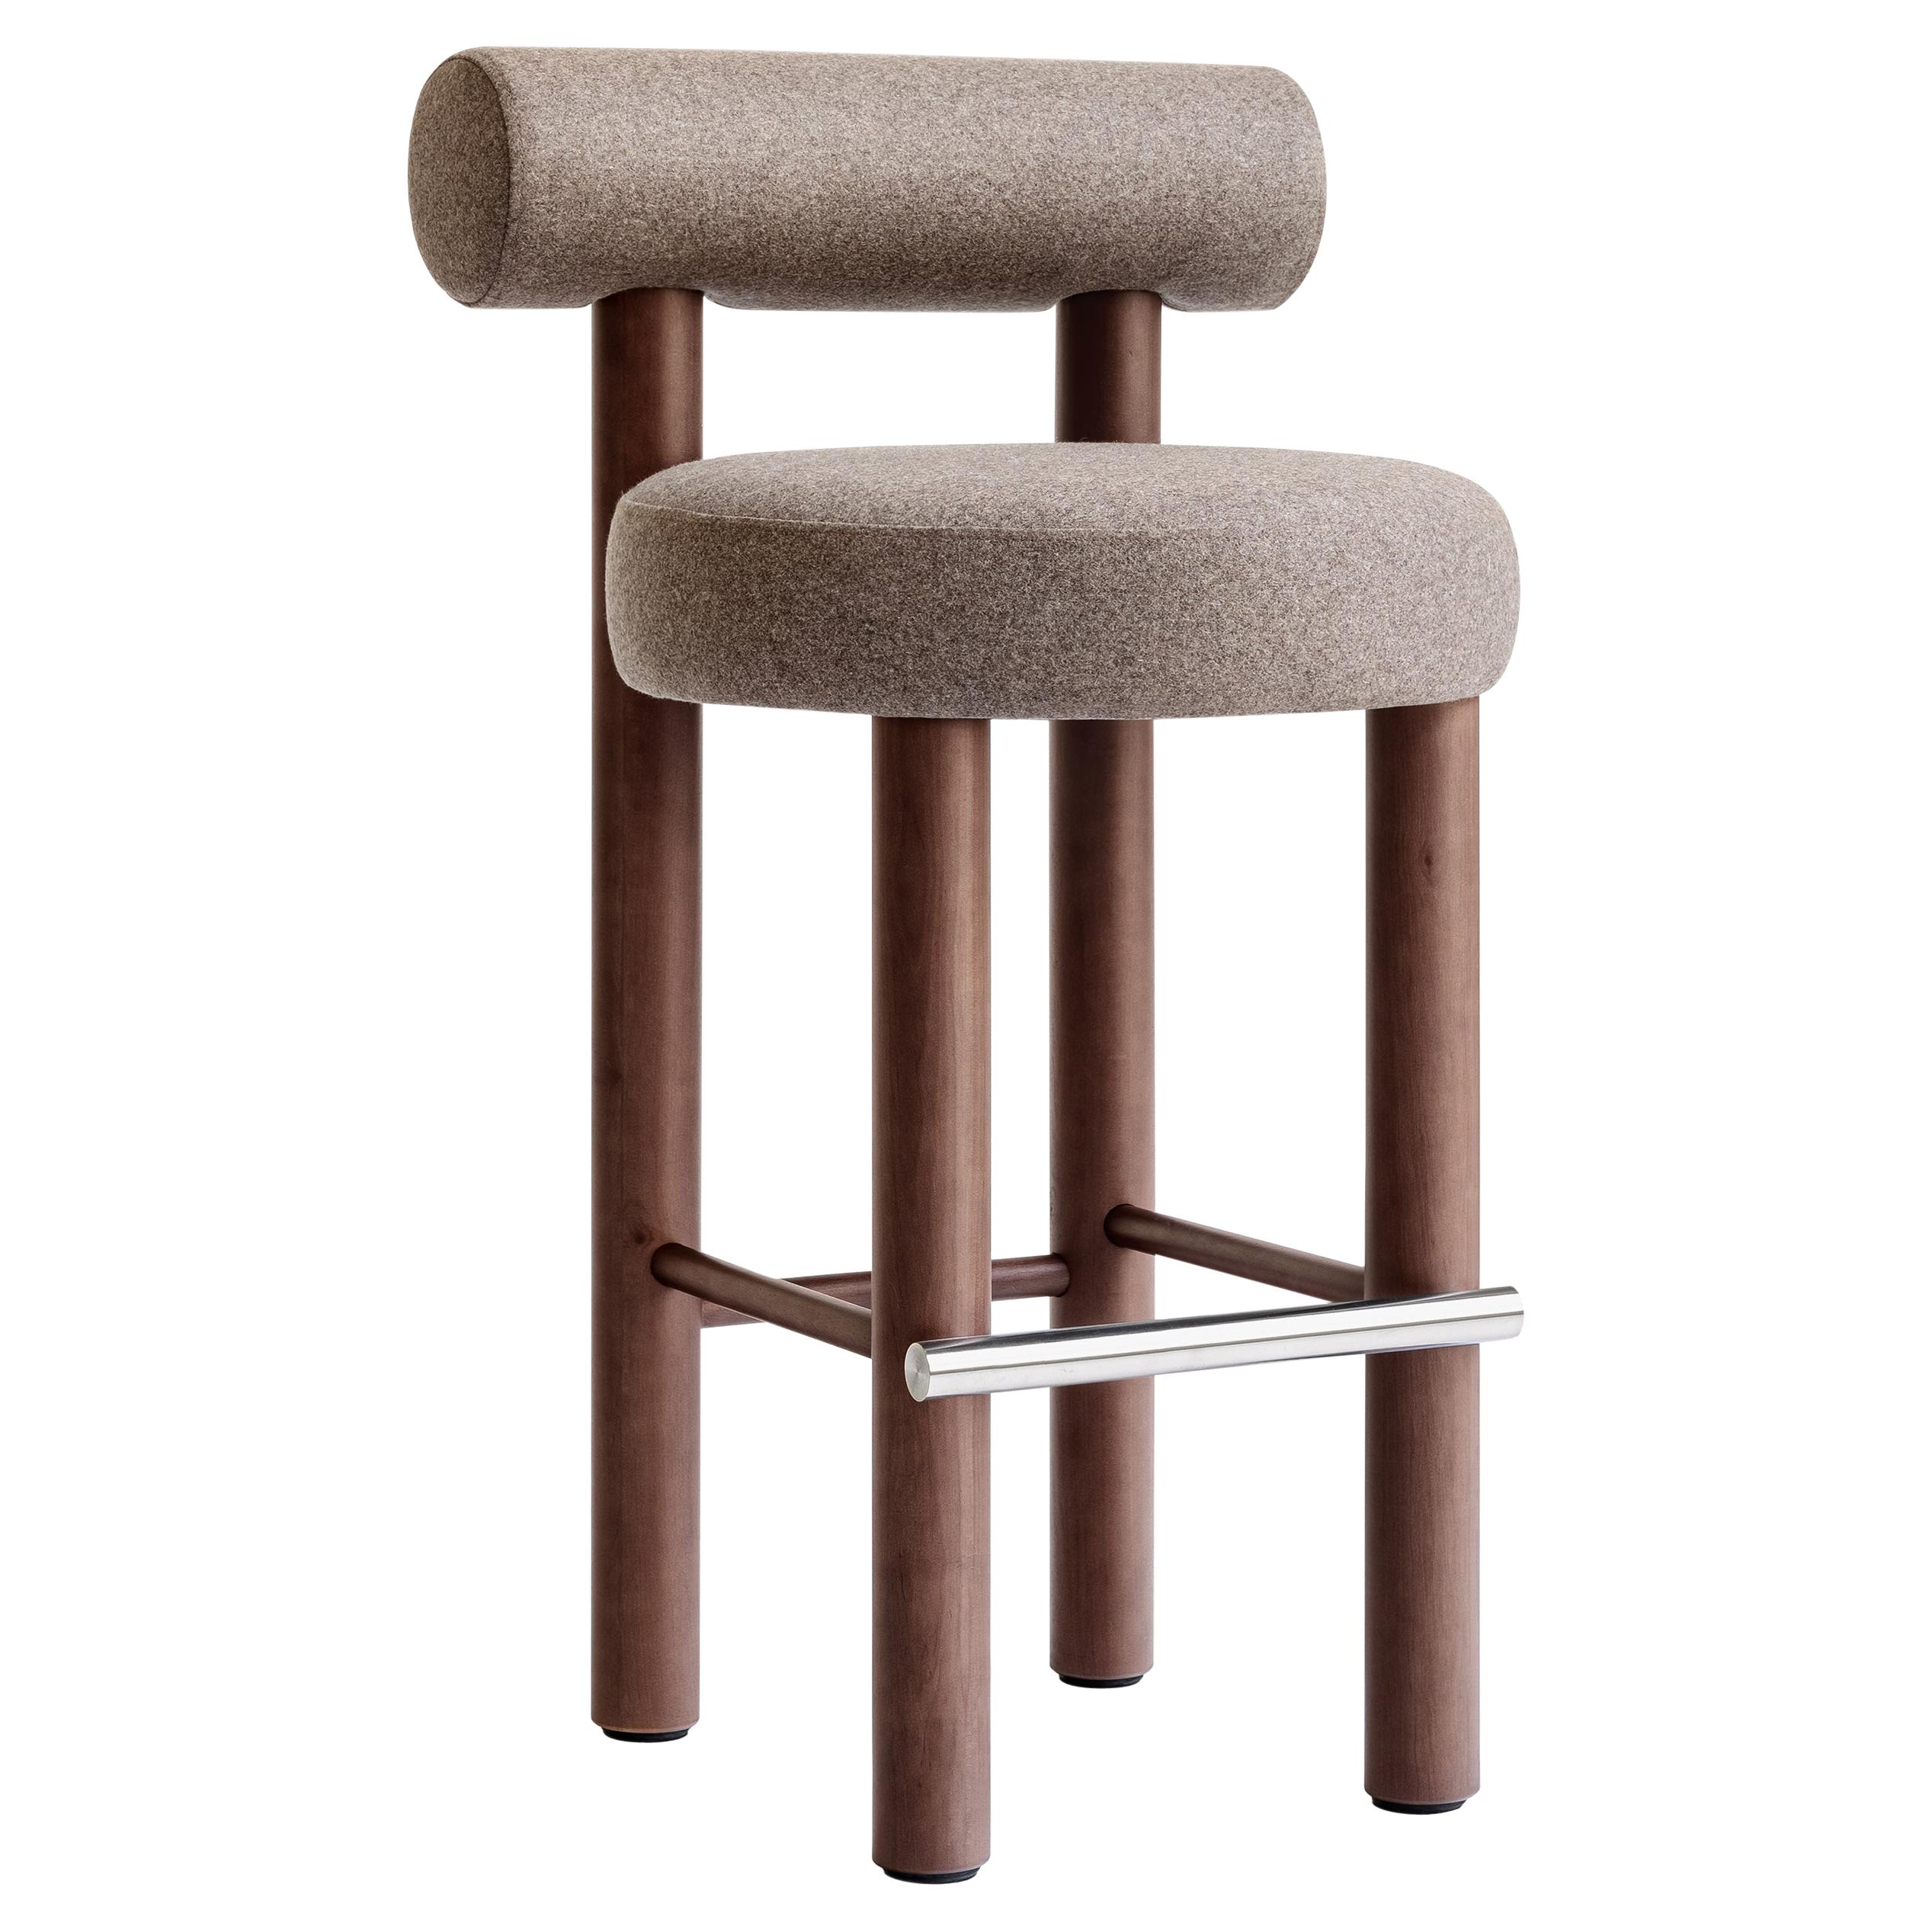 Modern Bar Chair Gropius CS2/75 in Wool Fabric with Wooden Legs by Noom